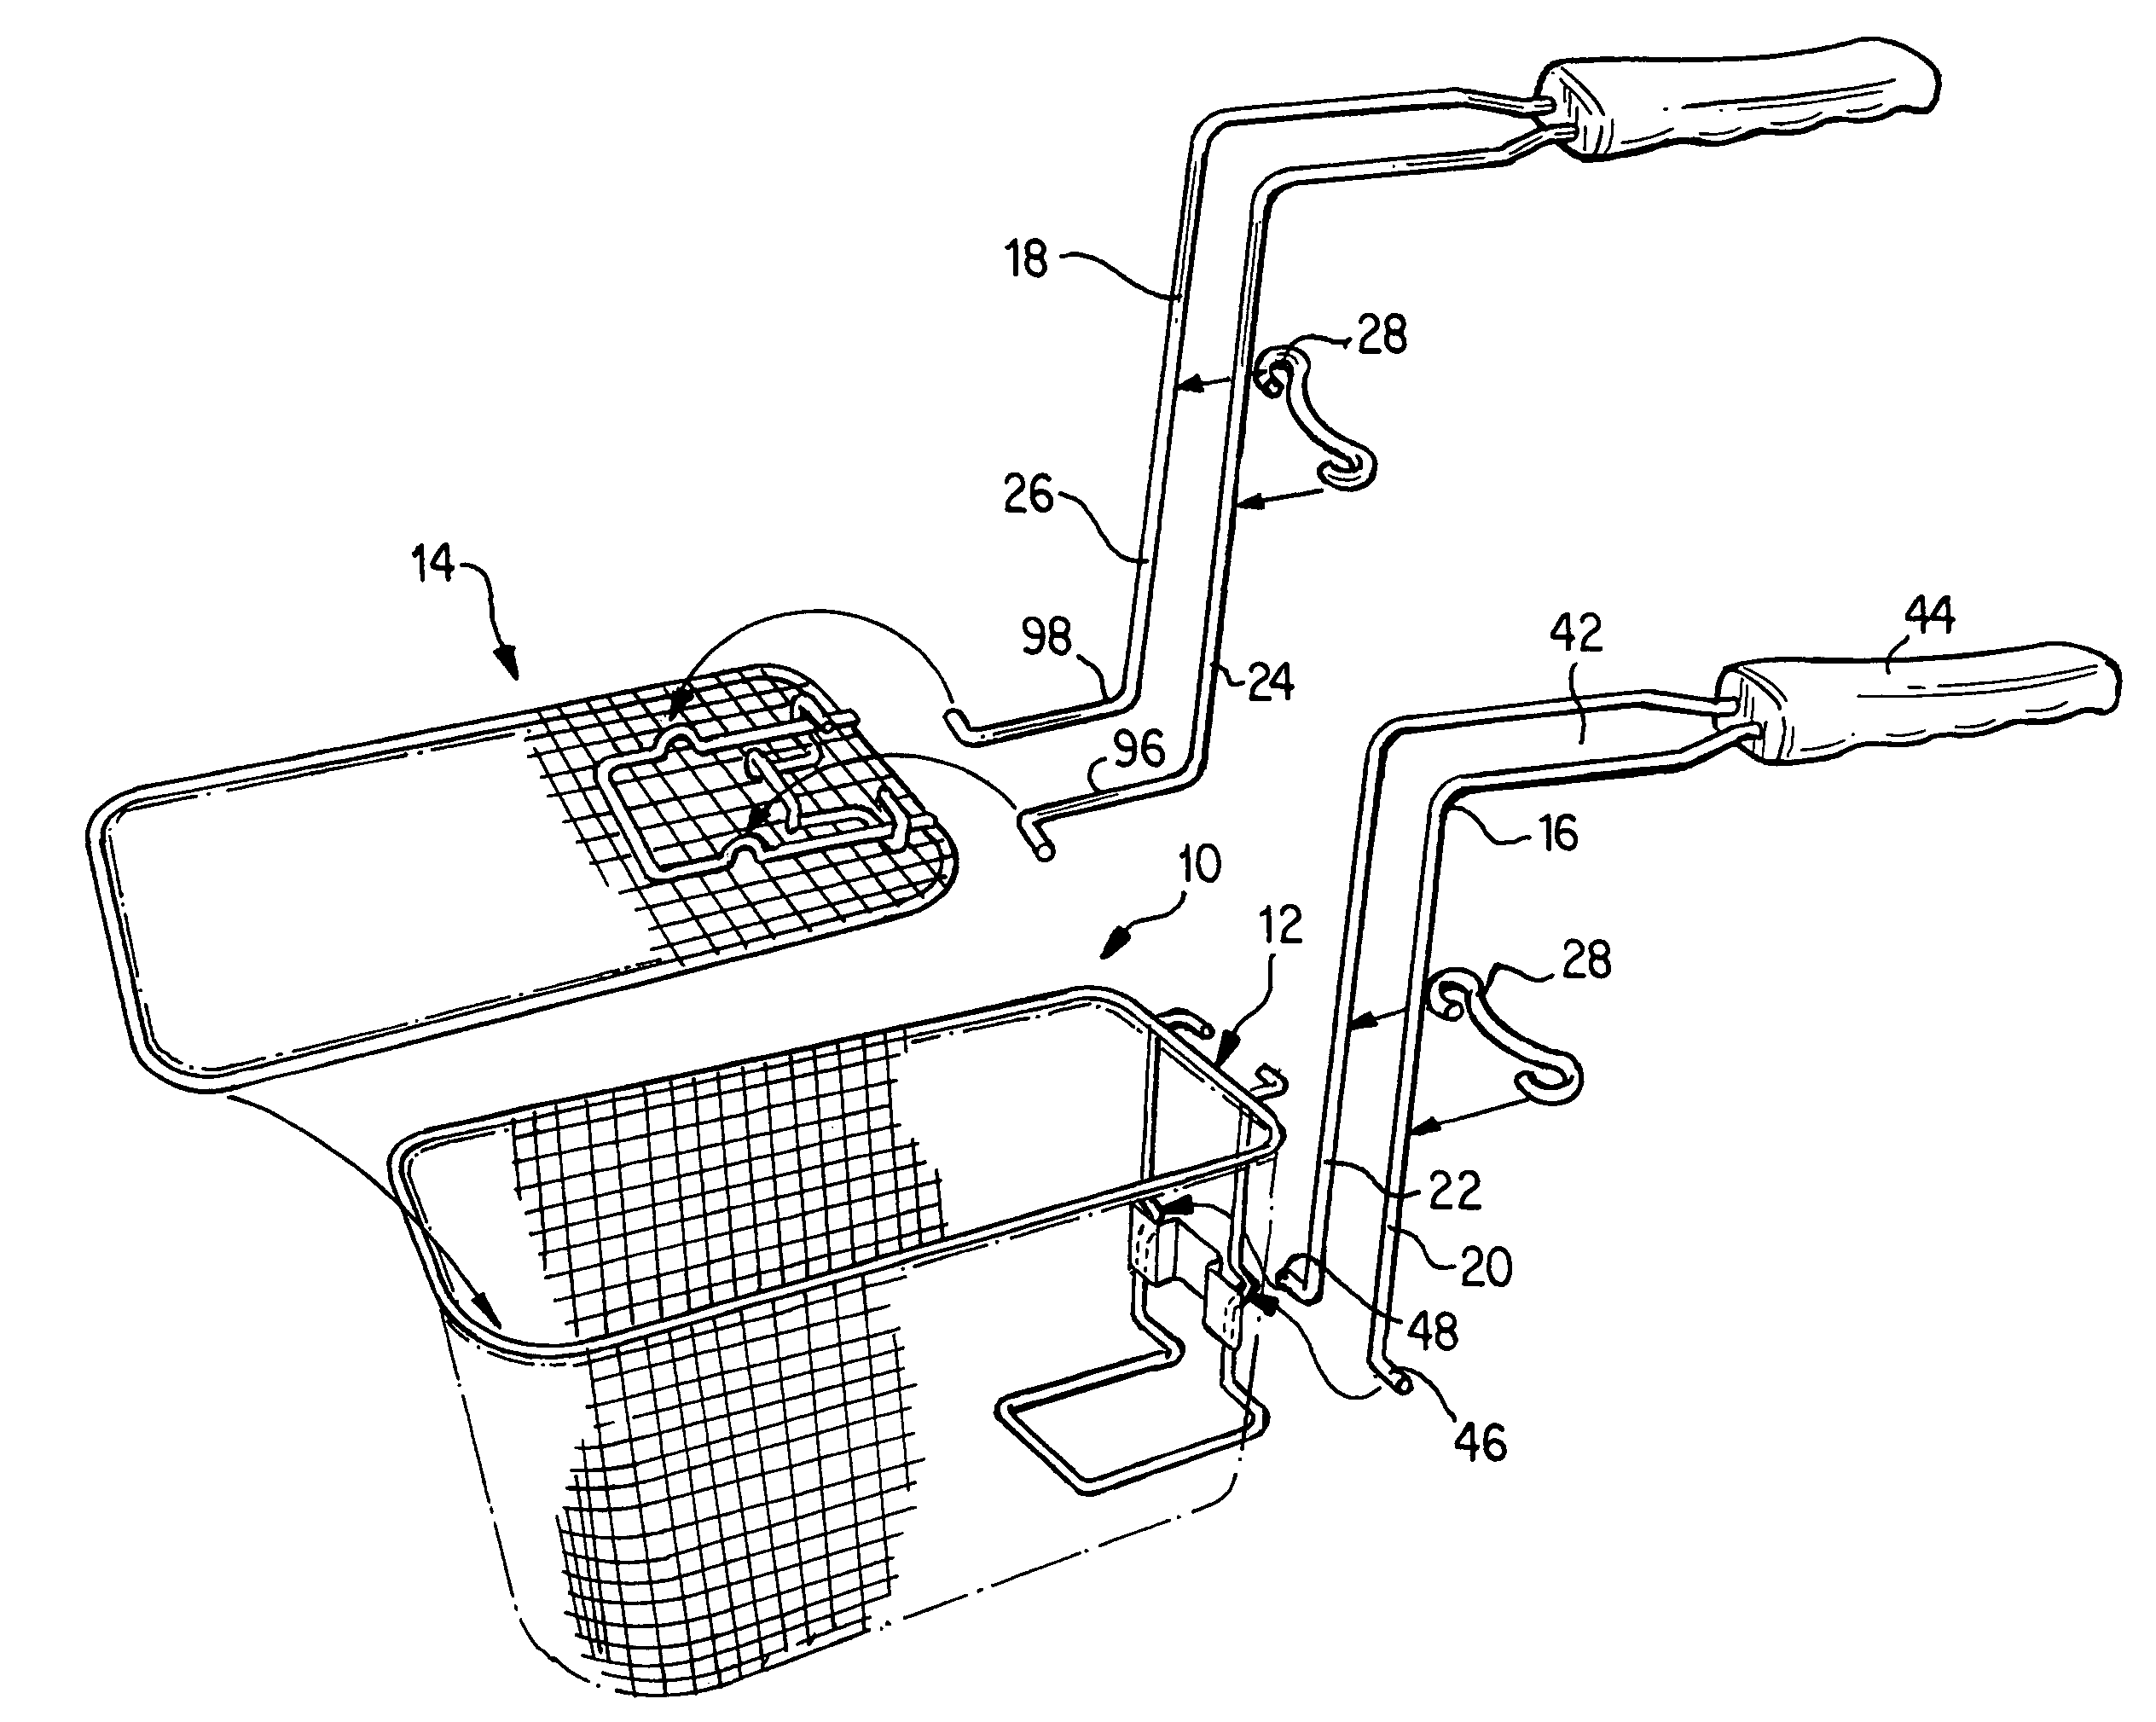 Basket for deep fryer and methods of cooking food products